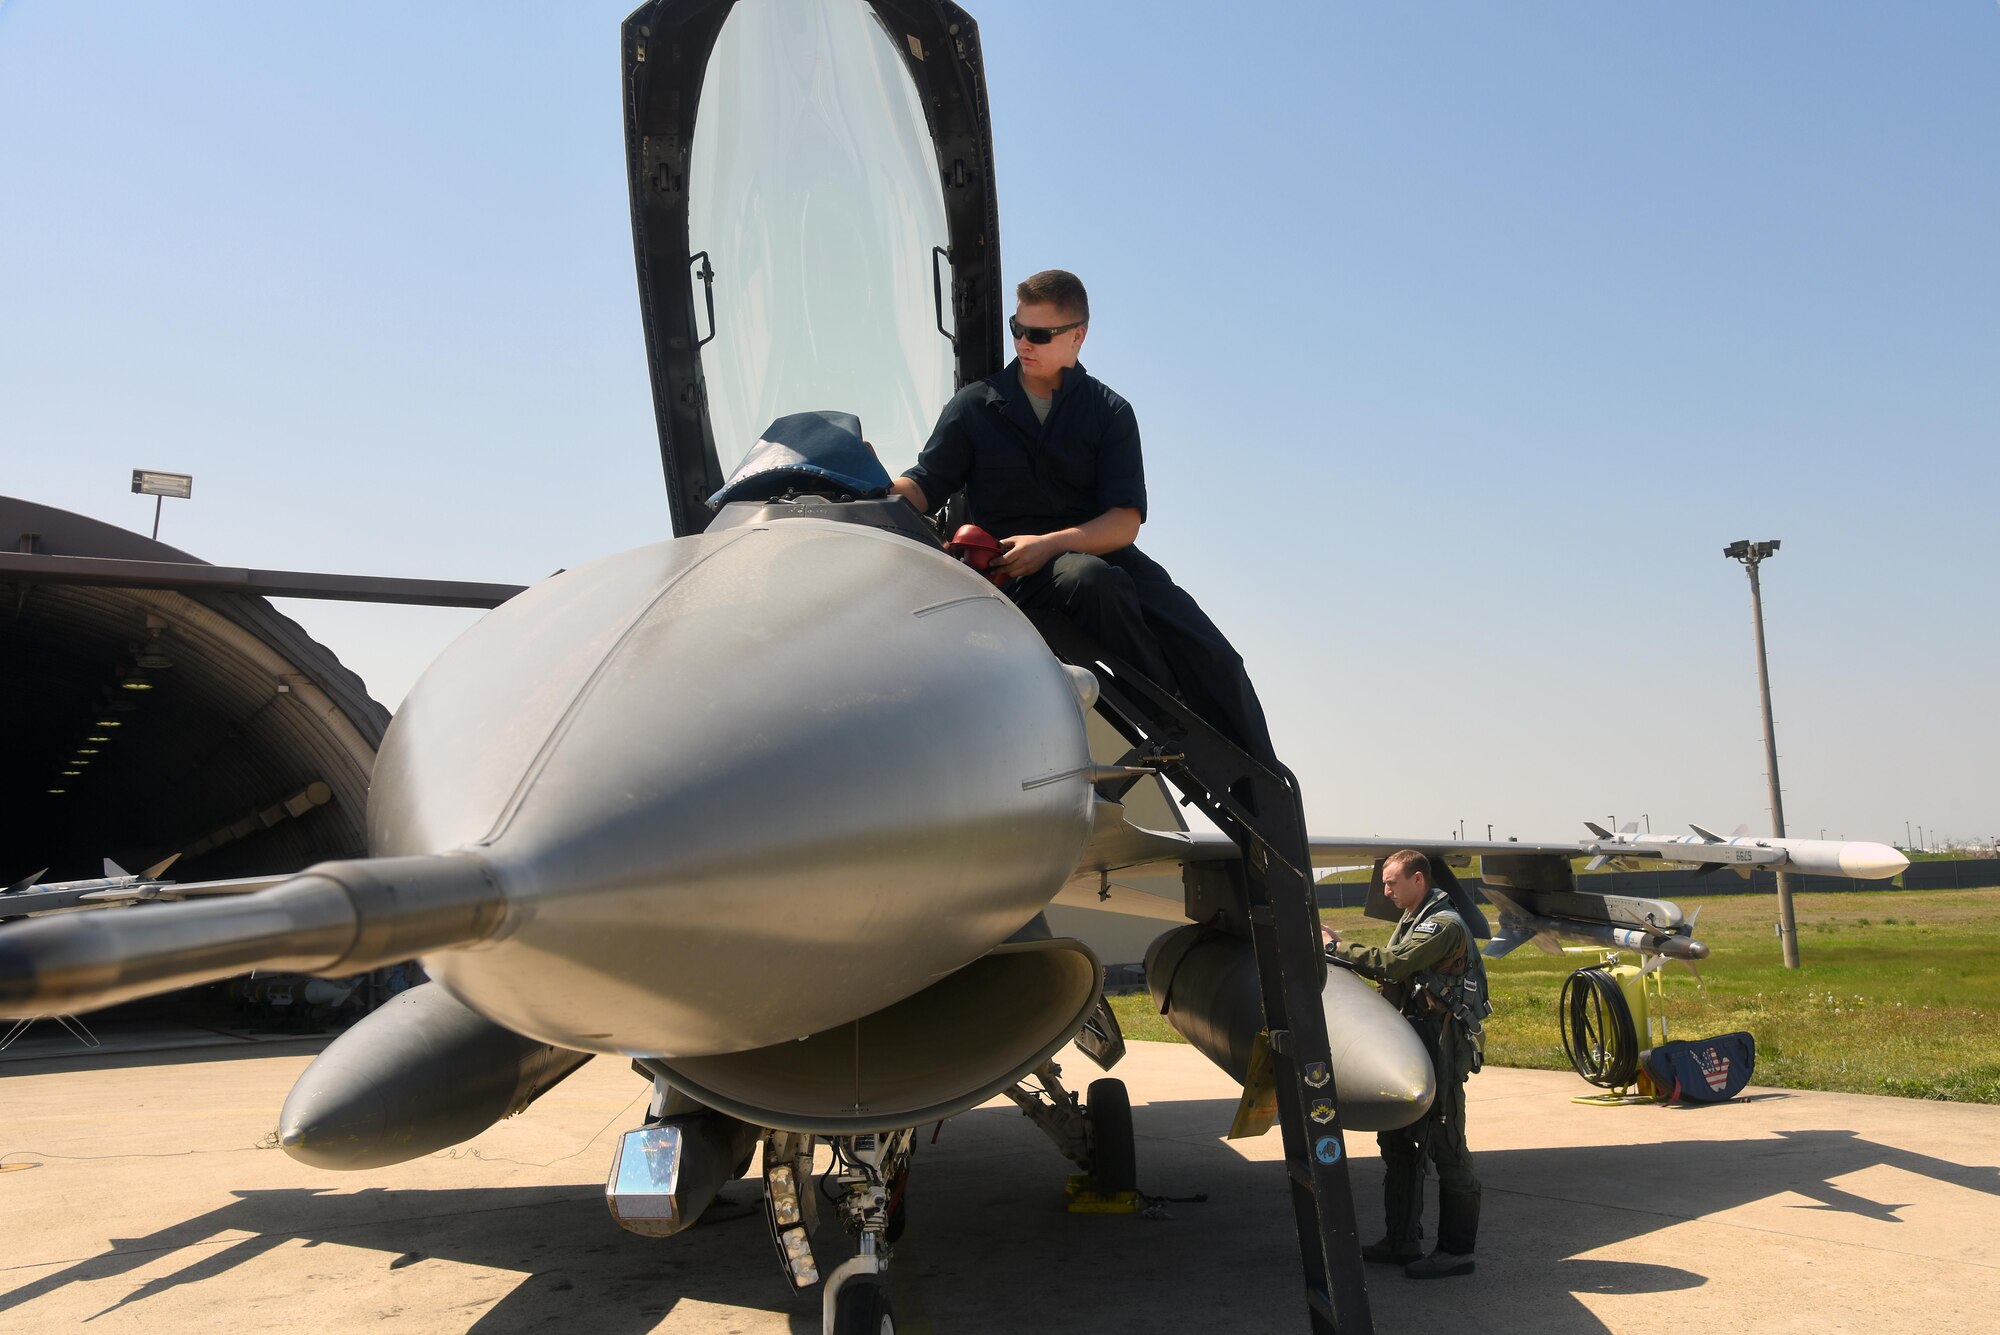 Airman 1st Class Austin Willey, 8th Aircraft Maintenance Squadron crew chief, left, and U.S. Air Force 1st Lt. Glenn Miltenberg, 35th Fighter Squadron pilot, conduct a pre-flight inspection on an F-16 Fighting Falcon during Exercise MAX THUNDER 17 at Kunsan Air Base, Republic of Korea, April 27, 2017. Max Thunder is a regularly scheduled training exercise designed to enhance the readiness of U.S. and ROK forces to defend the Republic of Korea. (U.S. Air Force photo by Tech. Sgt. Jeff Andrejcik/Released)